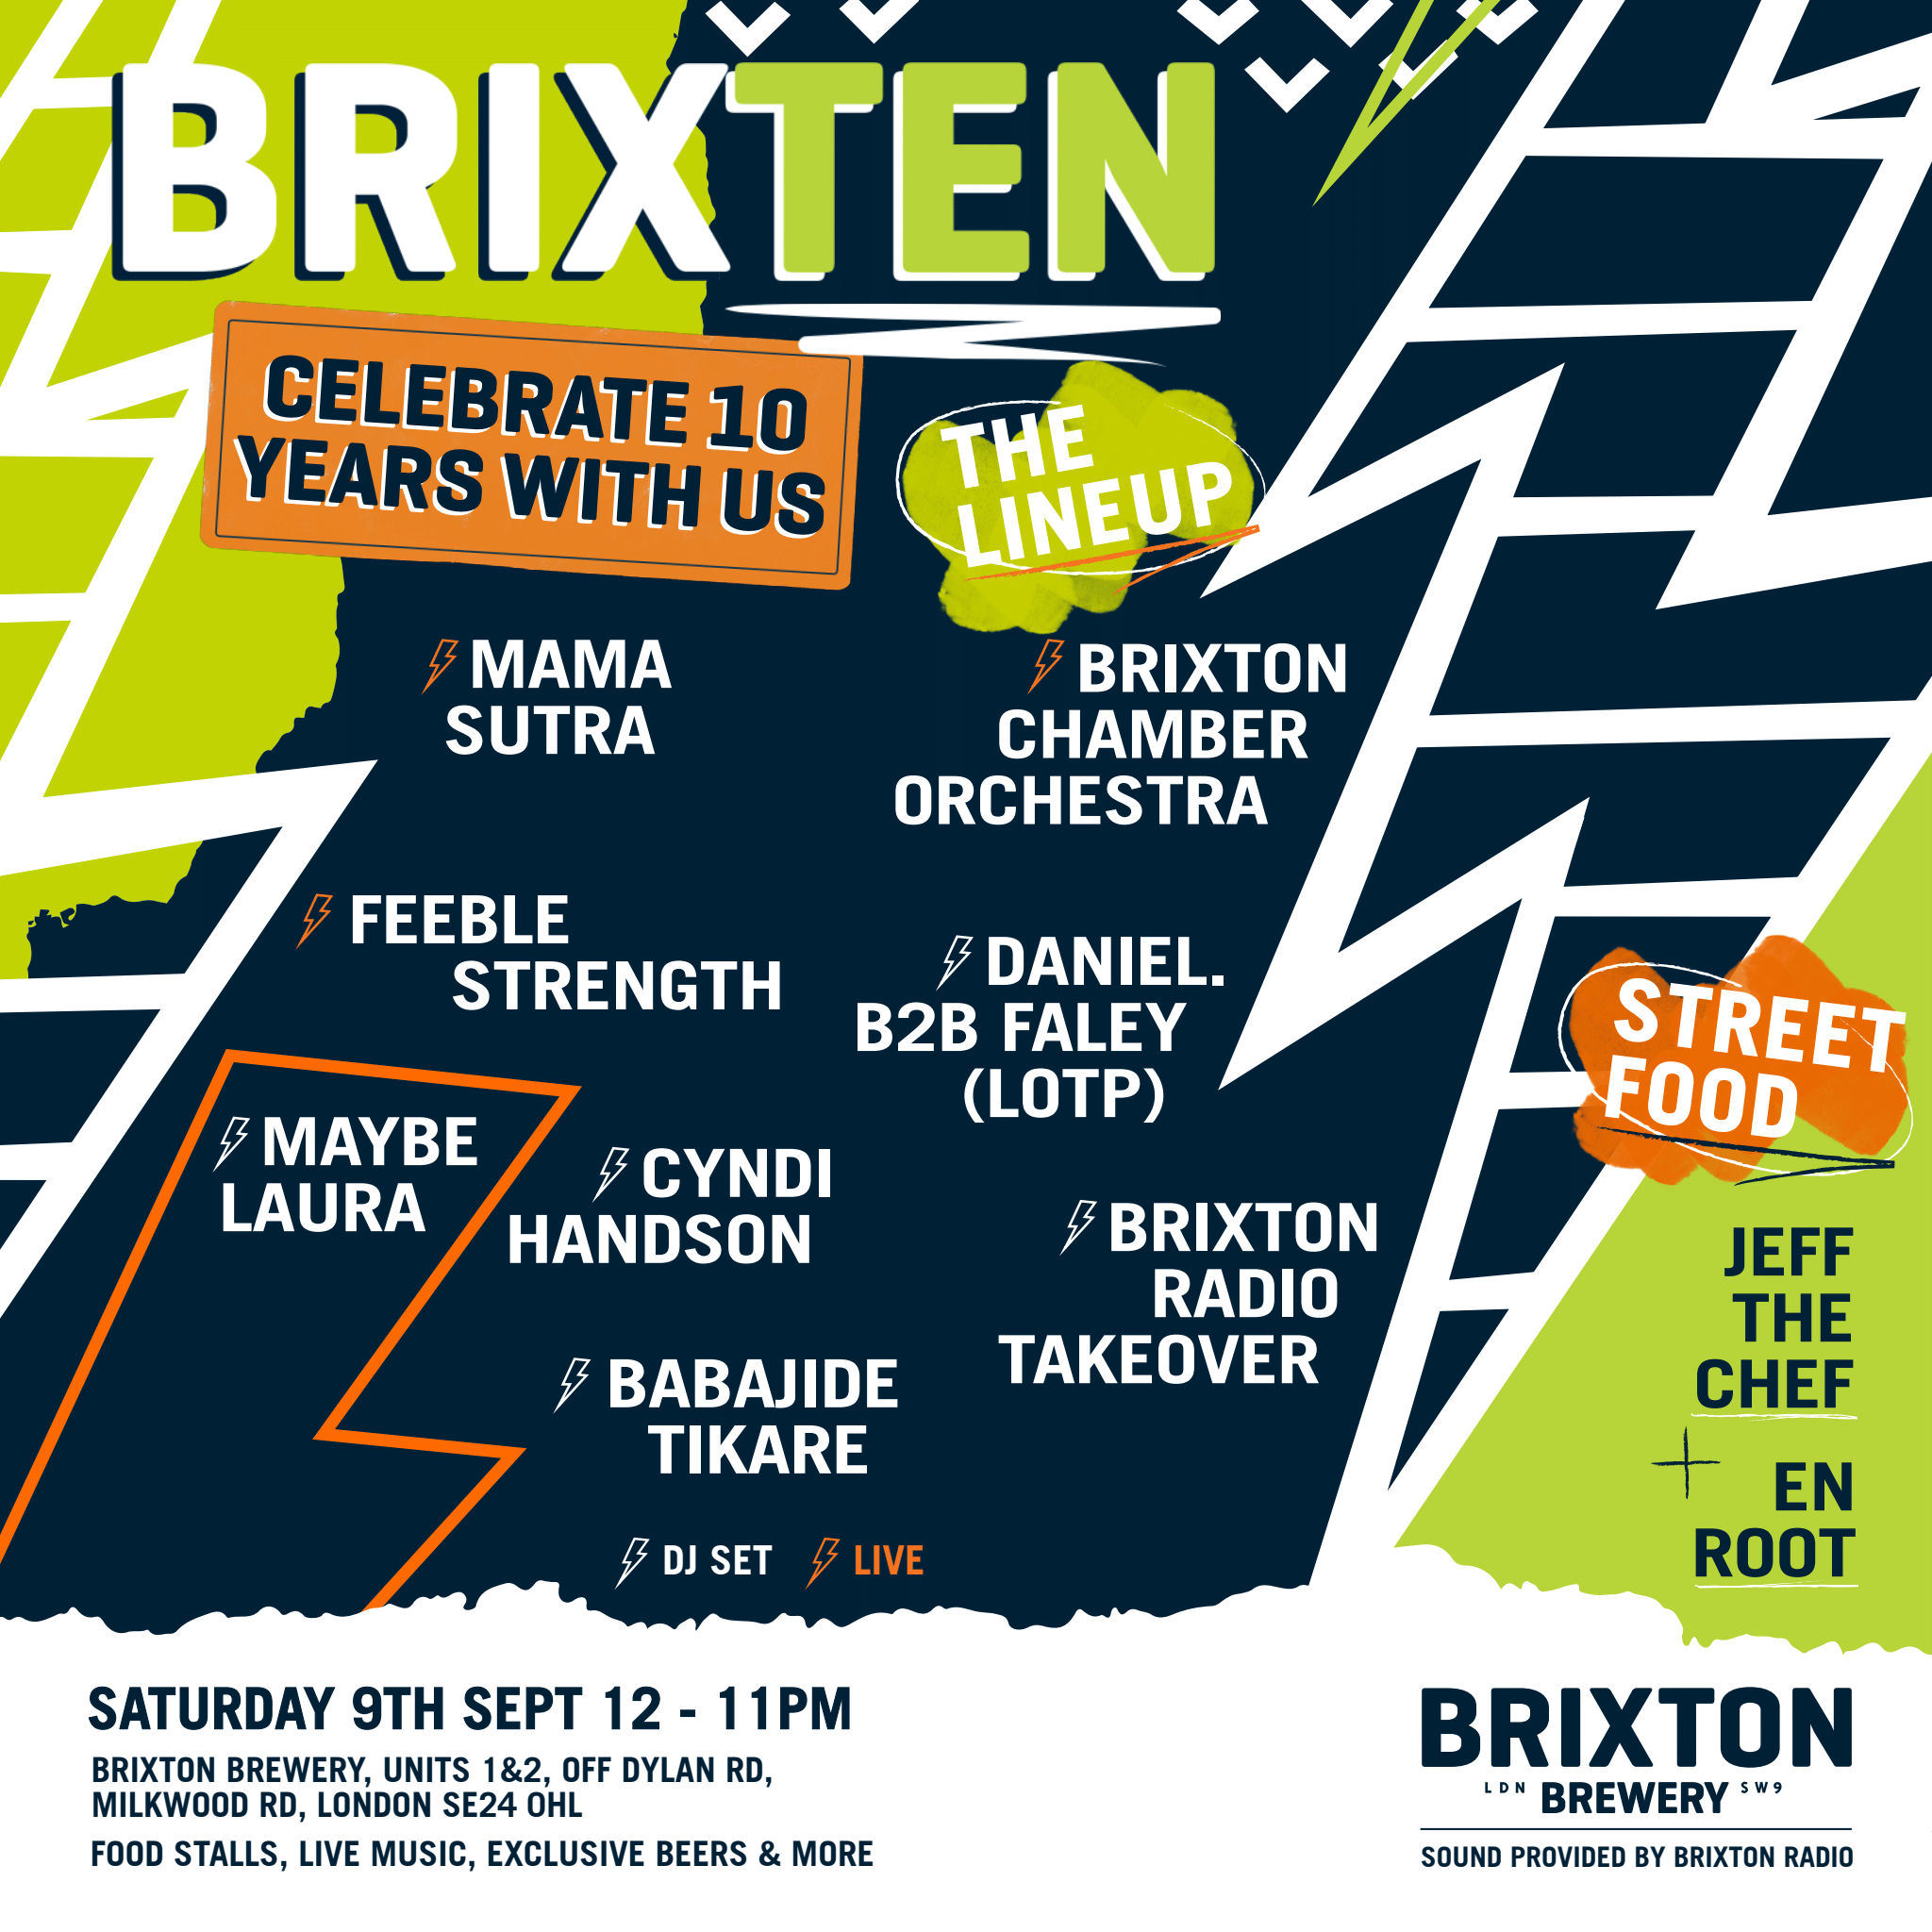 WE'RE CELEBRATING 10 YEARS OF BRIXTON BREWERY!